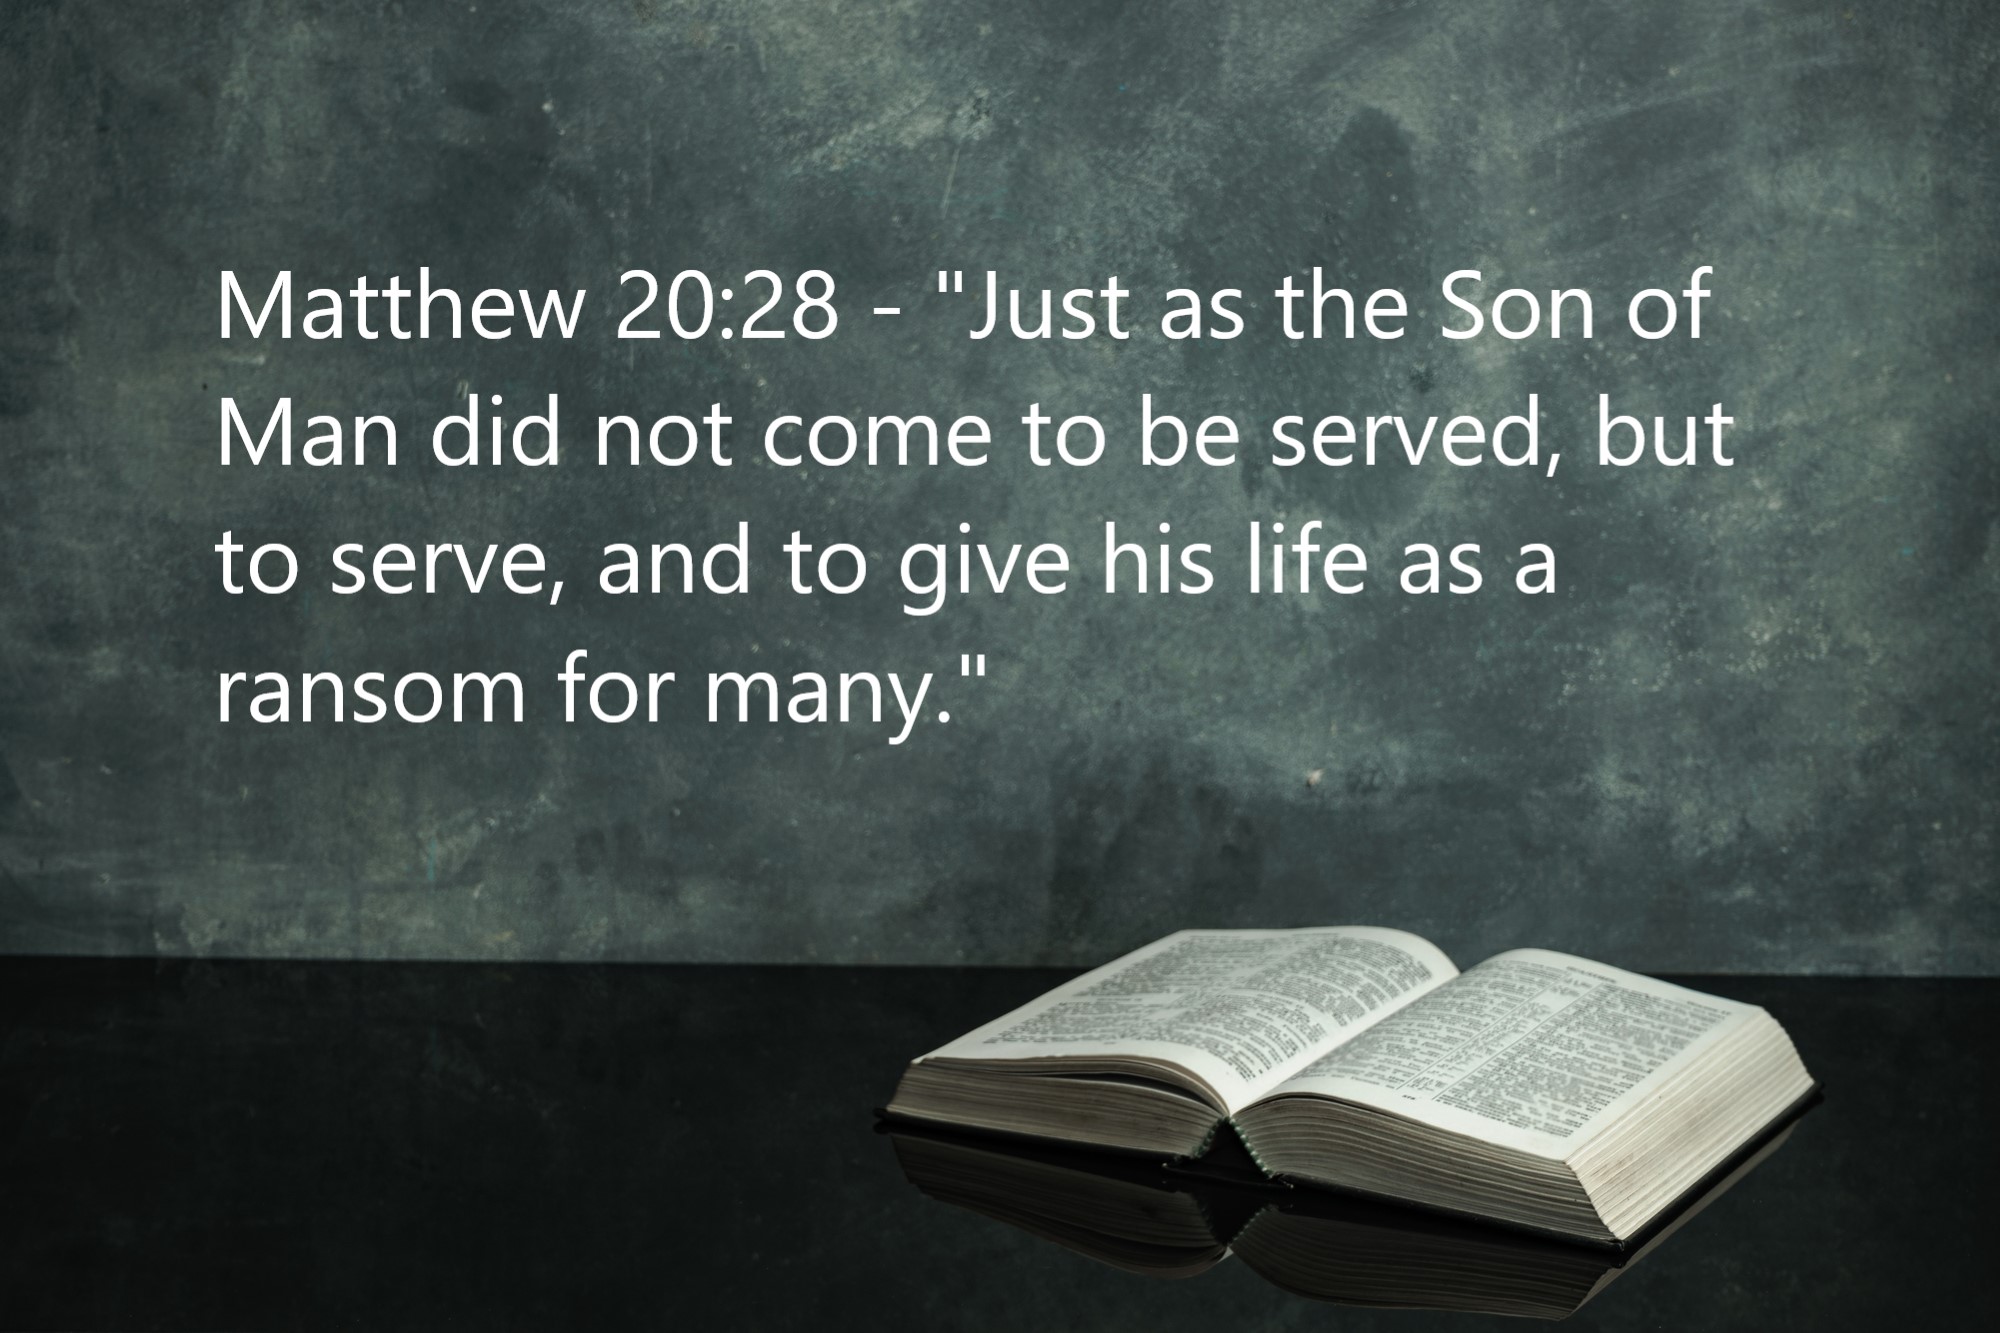 Matthew 20:28: "Just as the Son of Man did not come to be served, but to serve, and to give his life as a ransom for many."